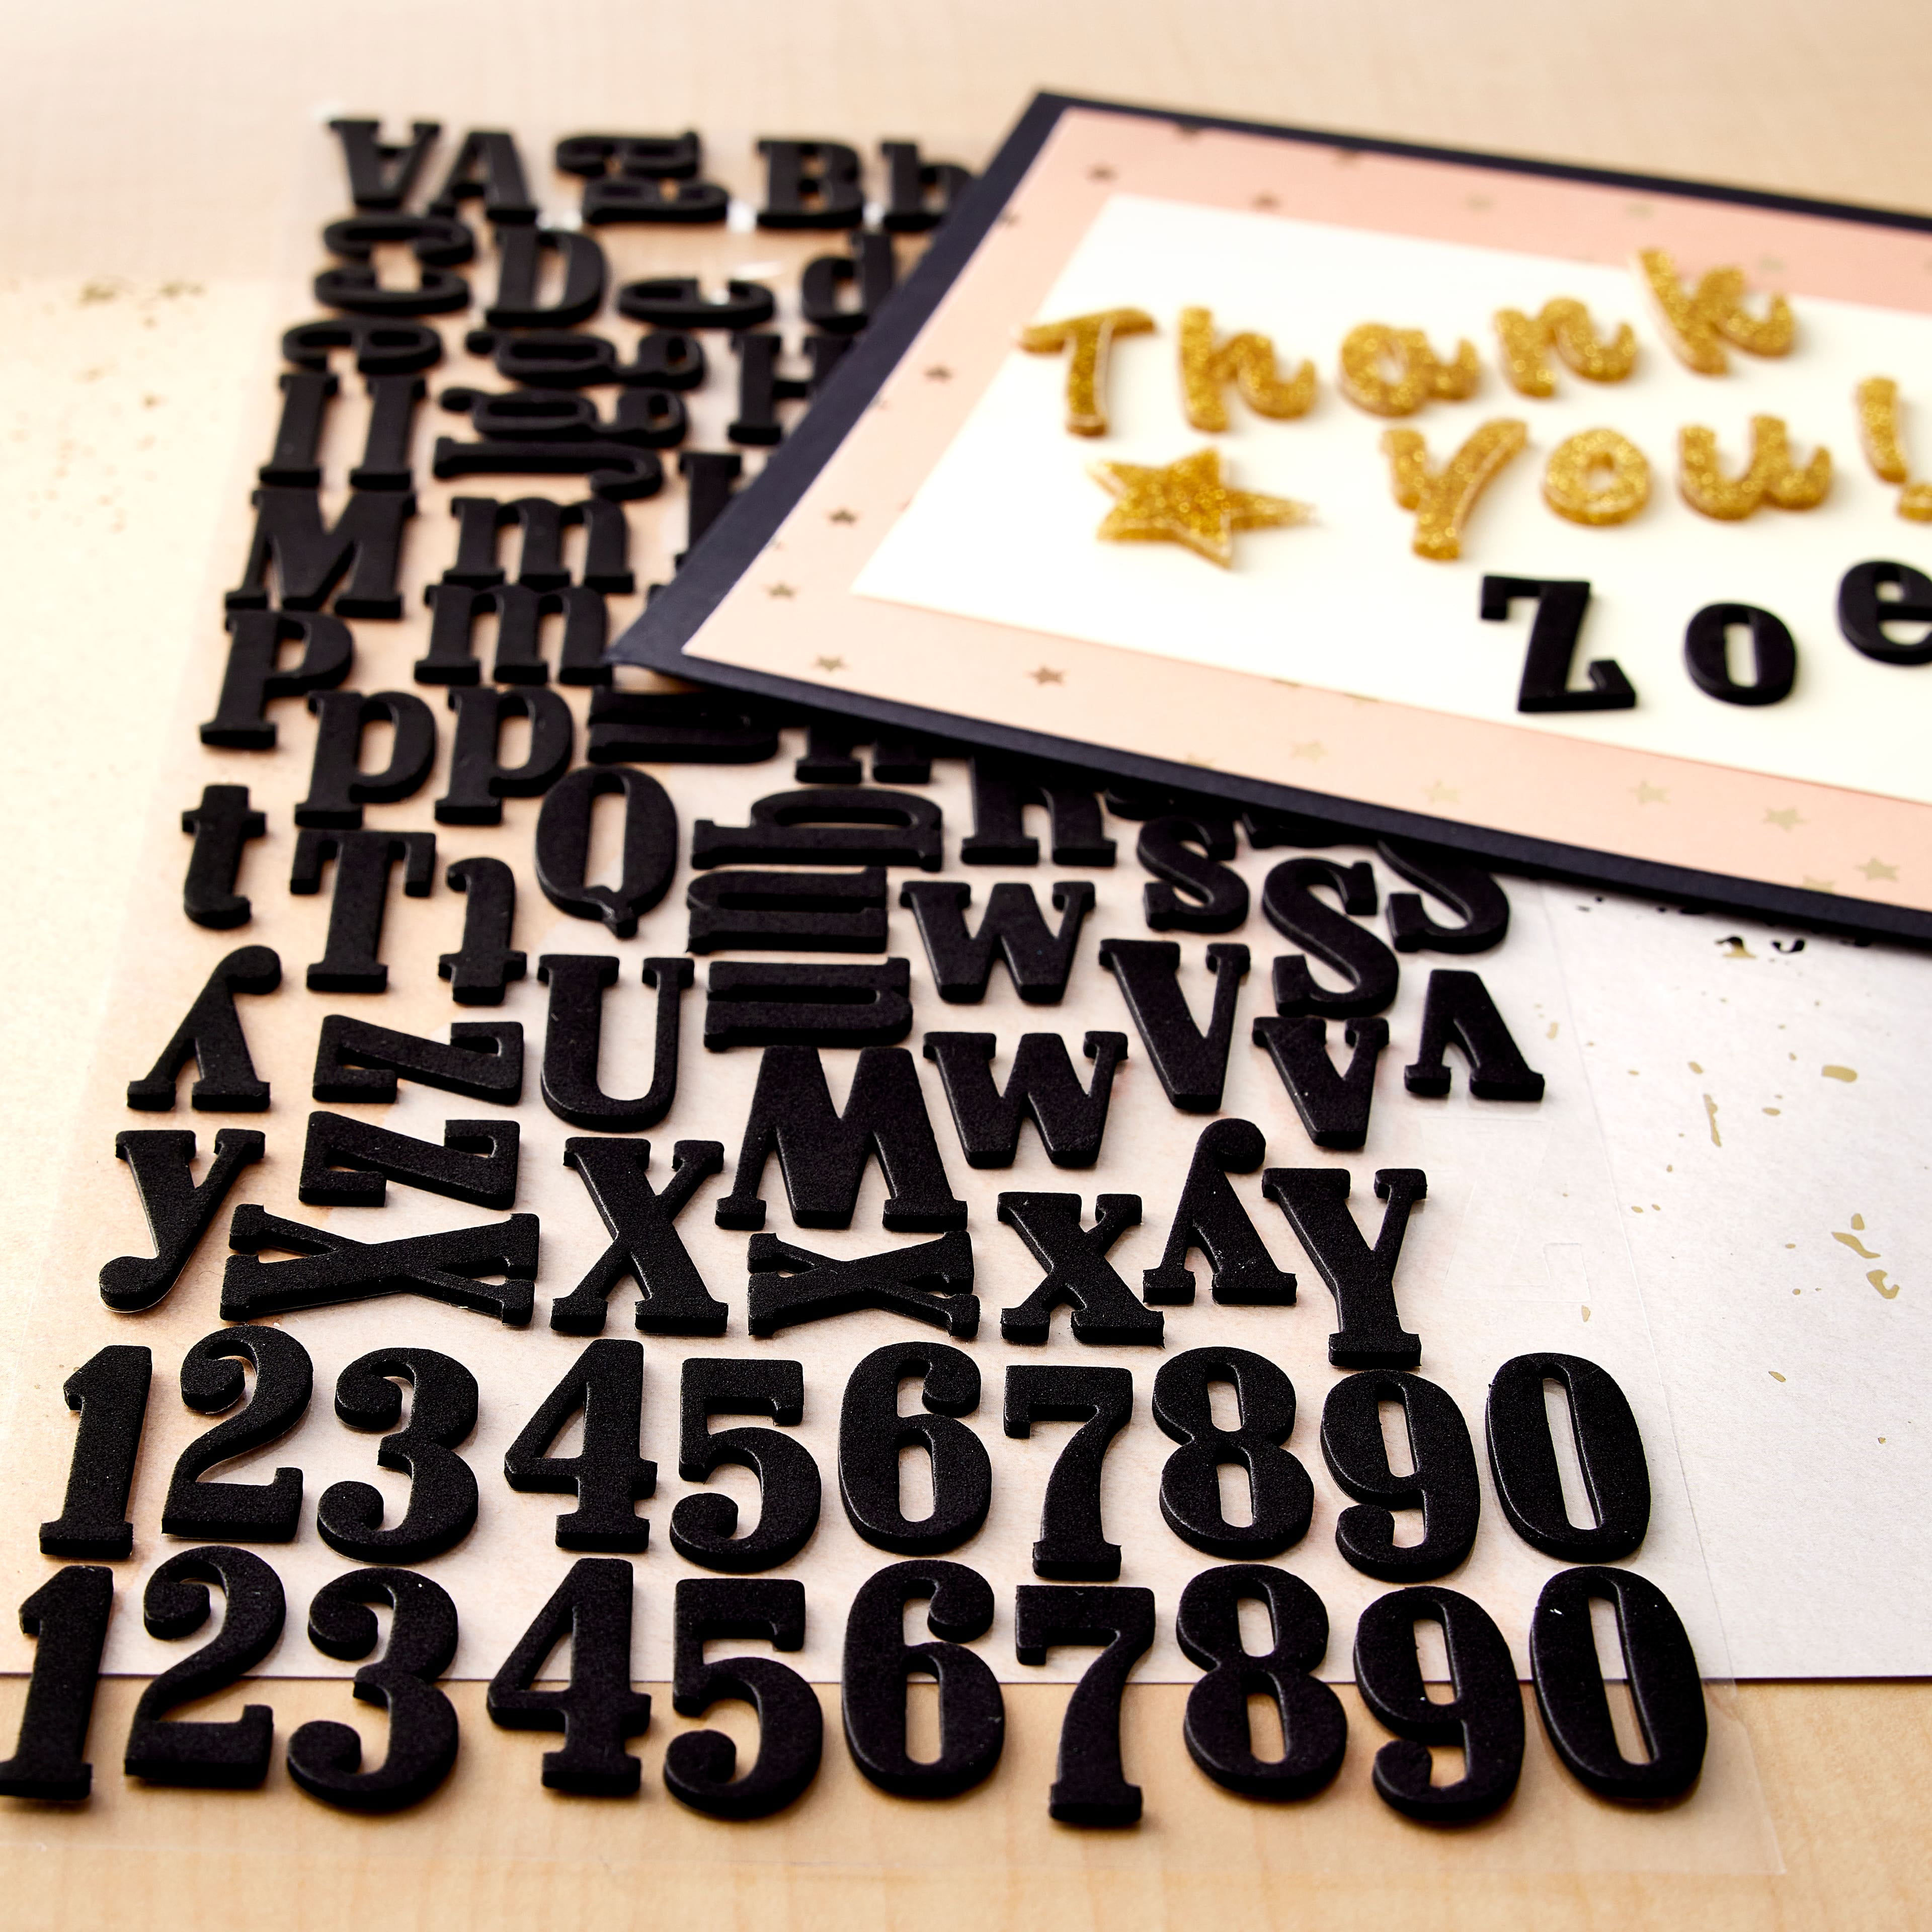 Large White Alphabet Foam Stickers by Recollections™